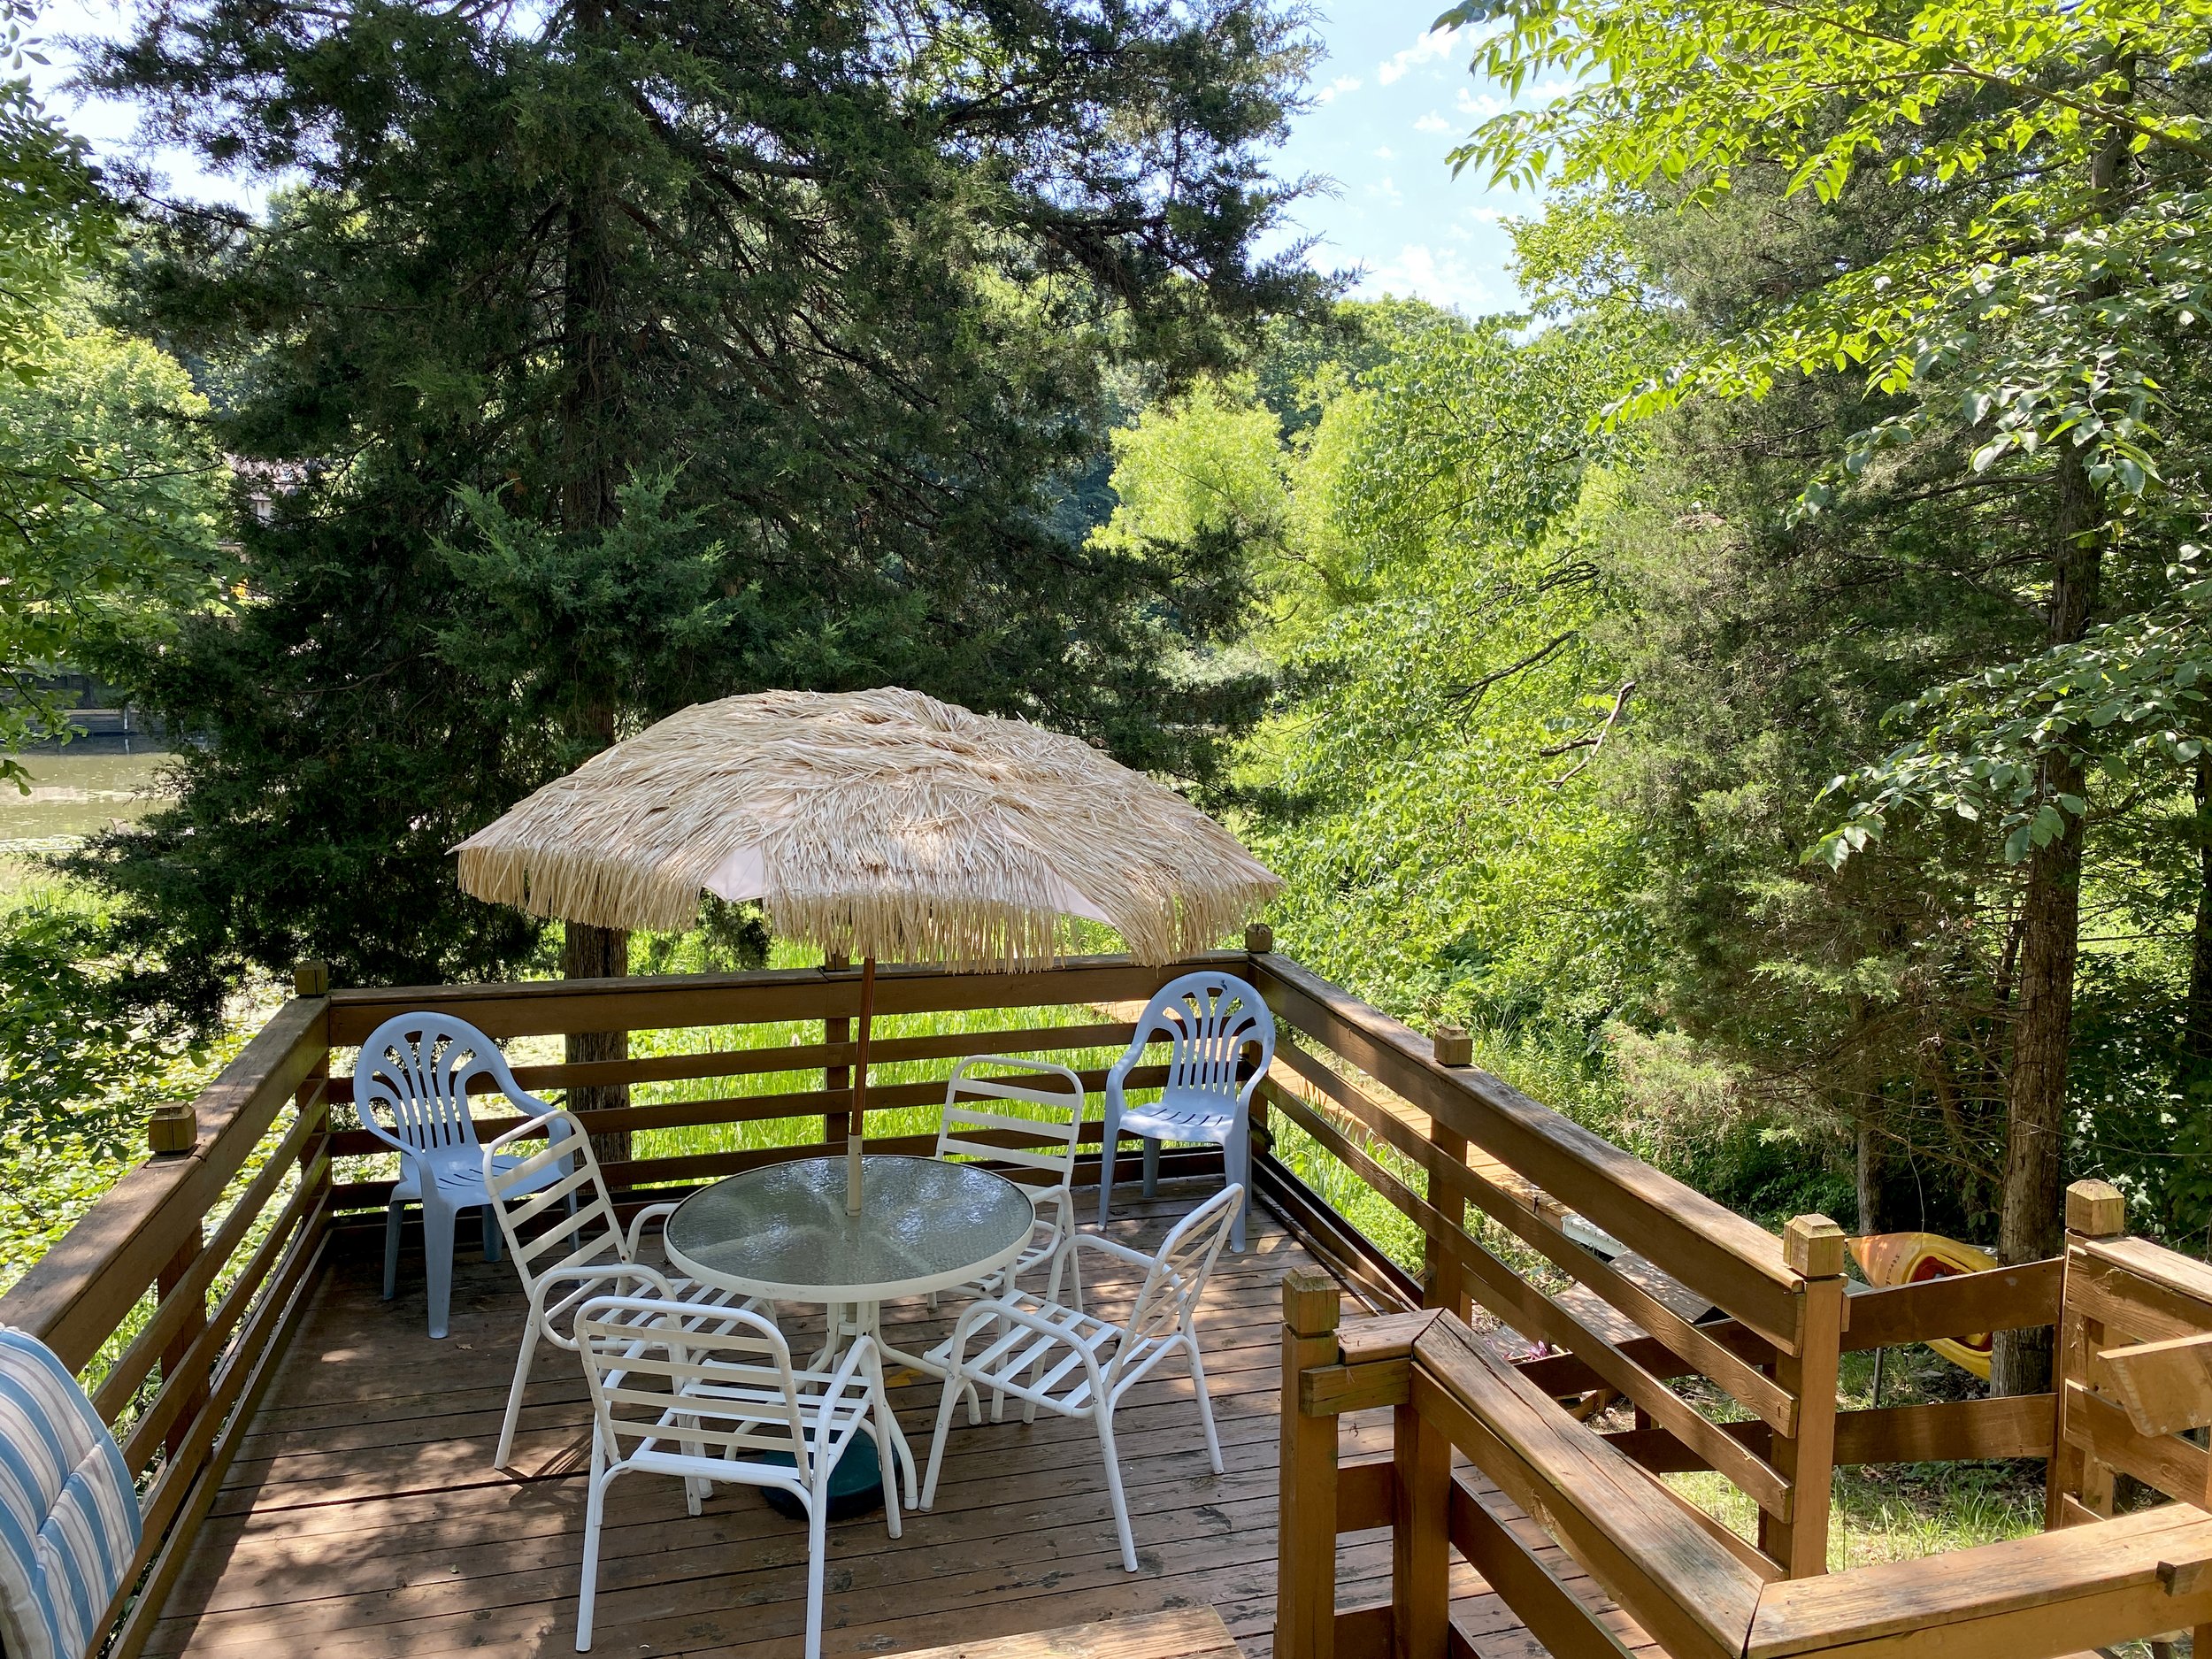  Seating area on our dock with a covered umbrella and table to dine at with a view of the river. Can play games with kids and have fun with friends. Open an umbrella and simply relax and enjoy the quiet day. 